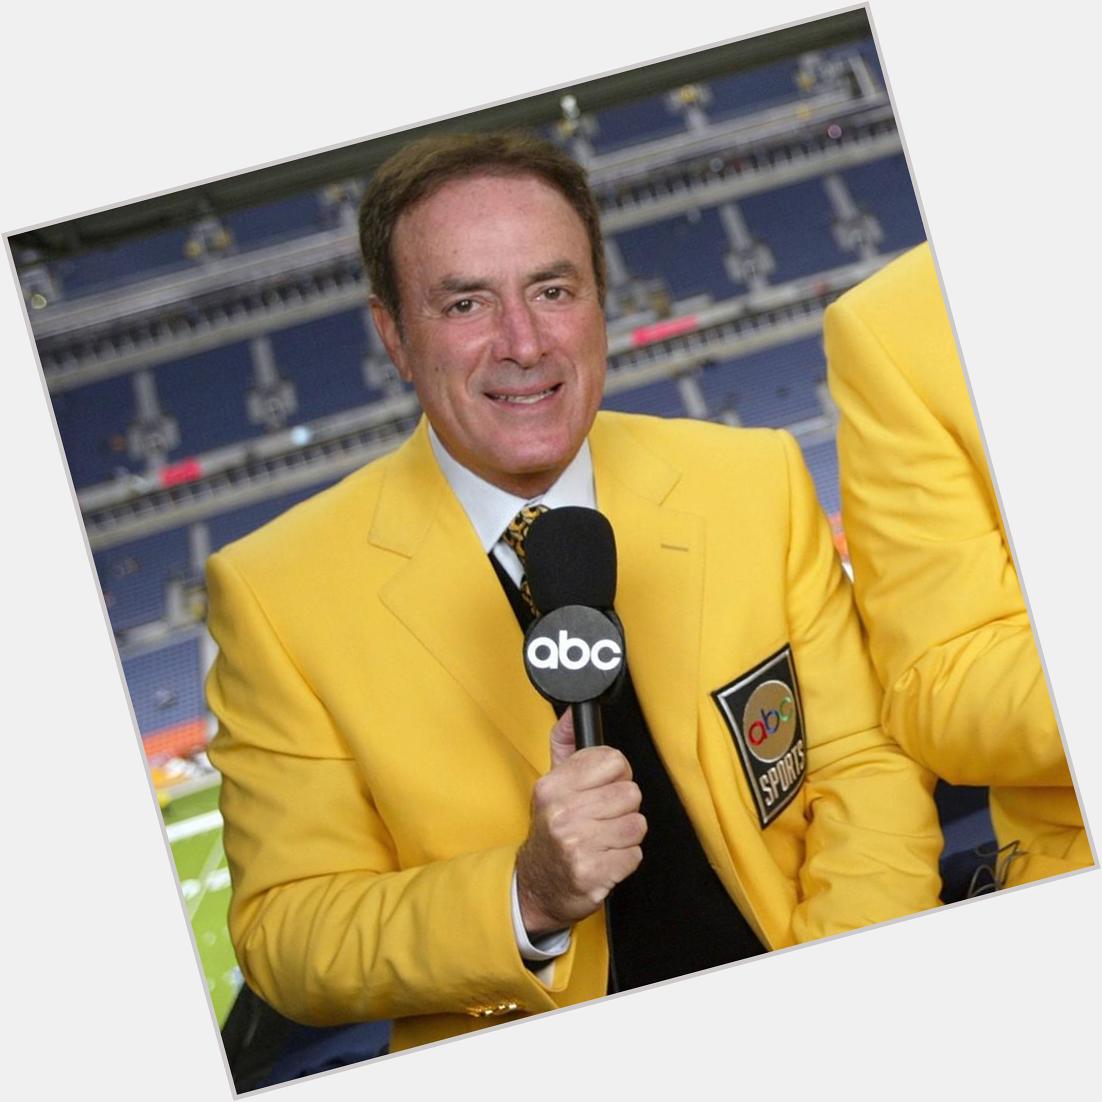 Late in the day happy 70th birthday to Al Michaels who called 323 games, 2nd most all-time. 